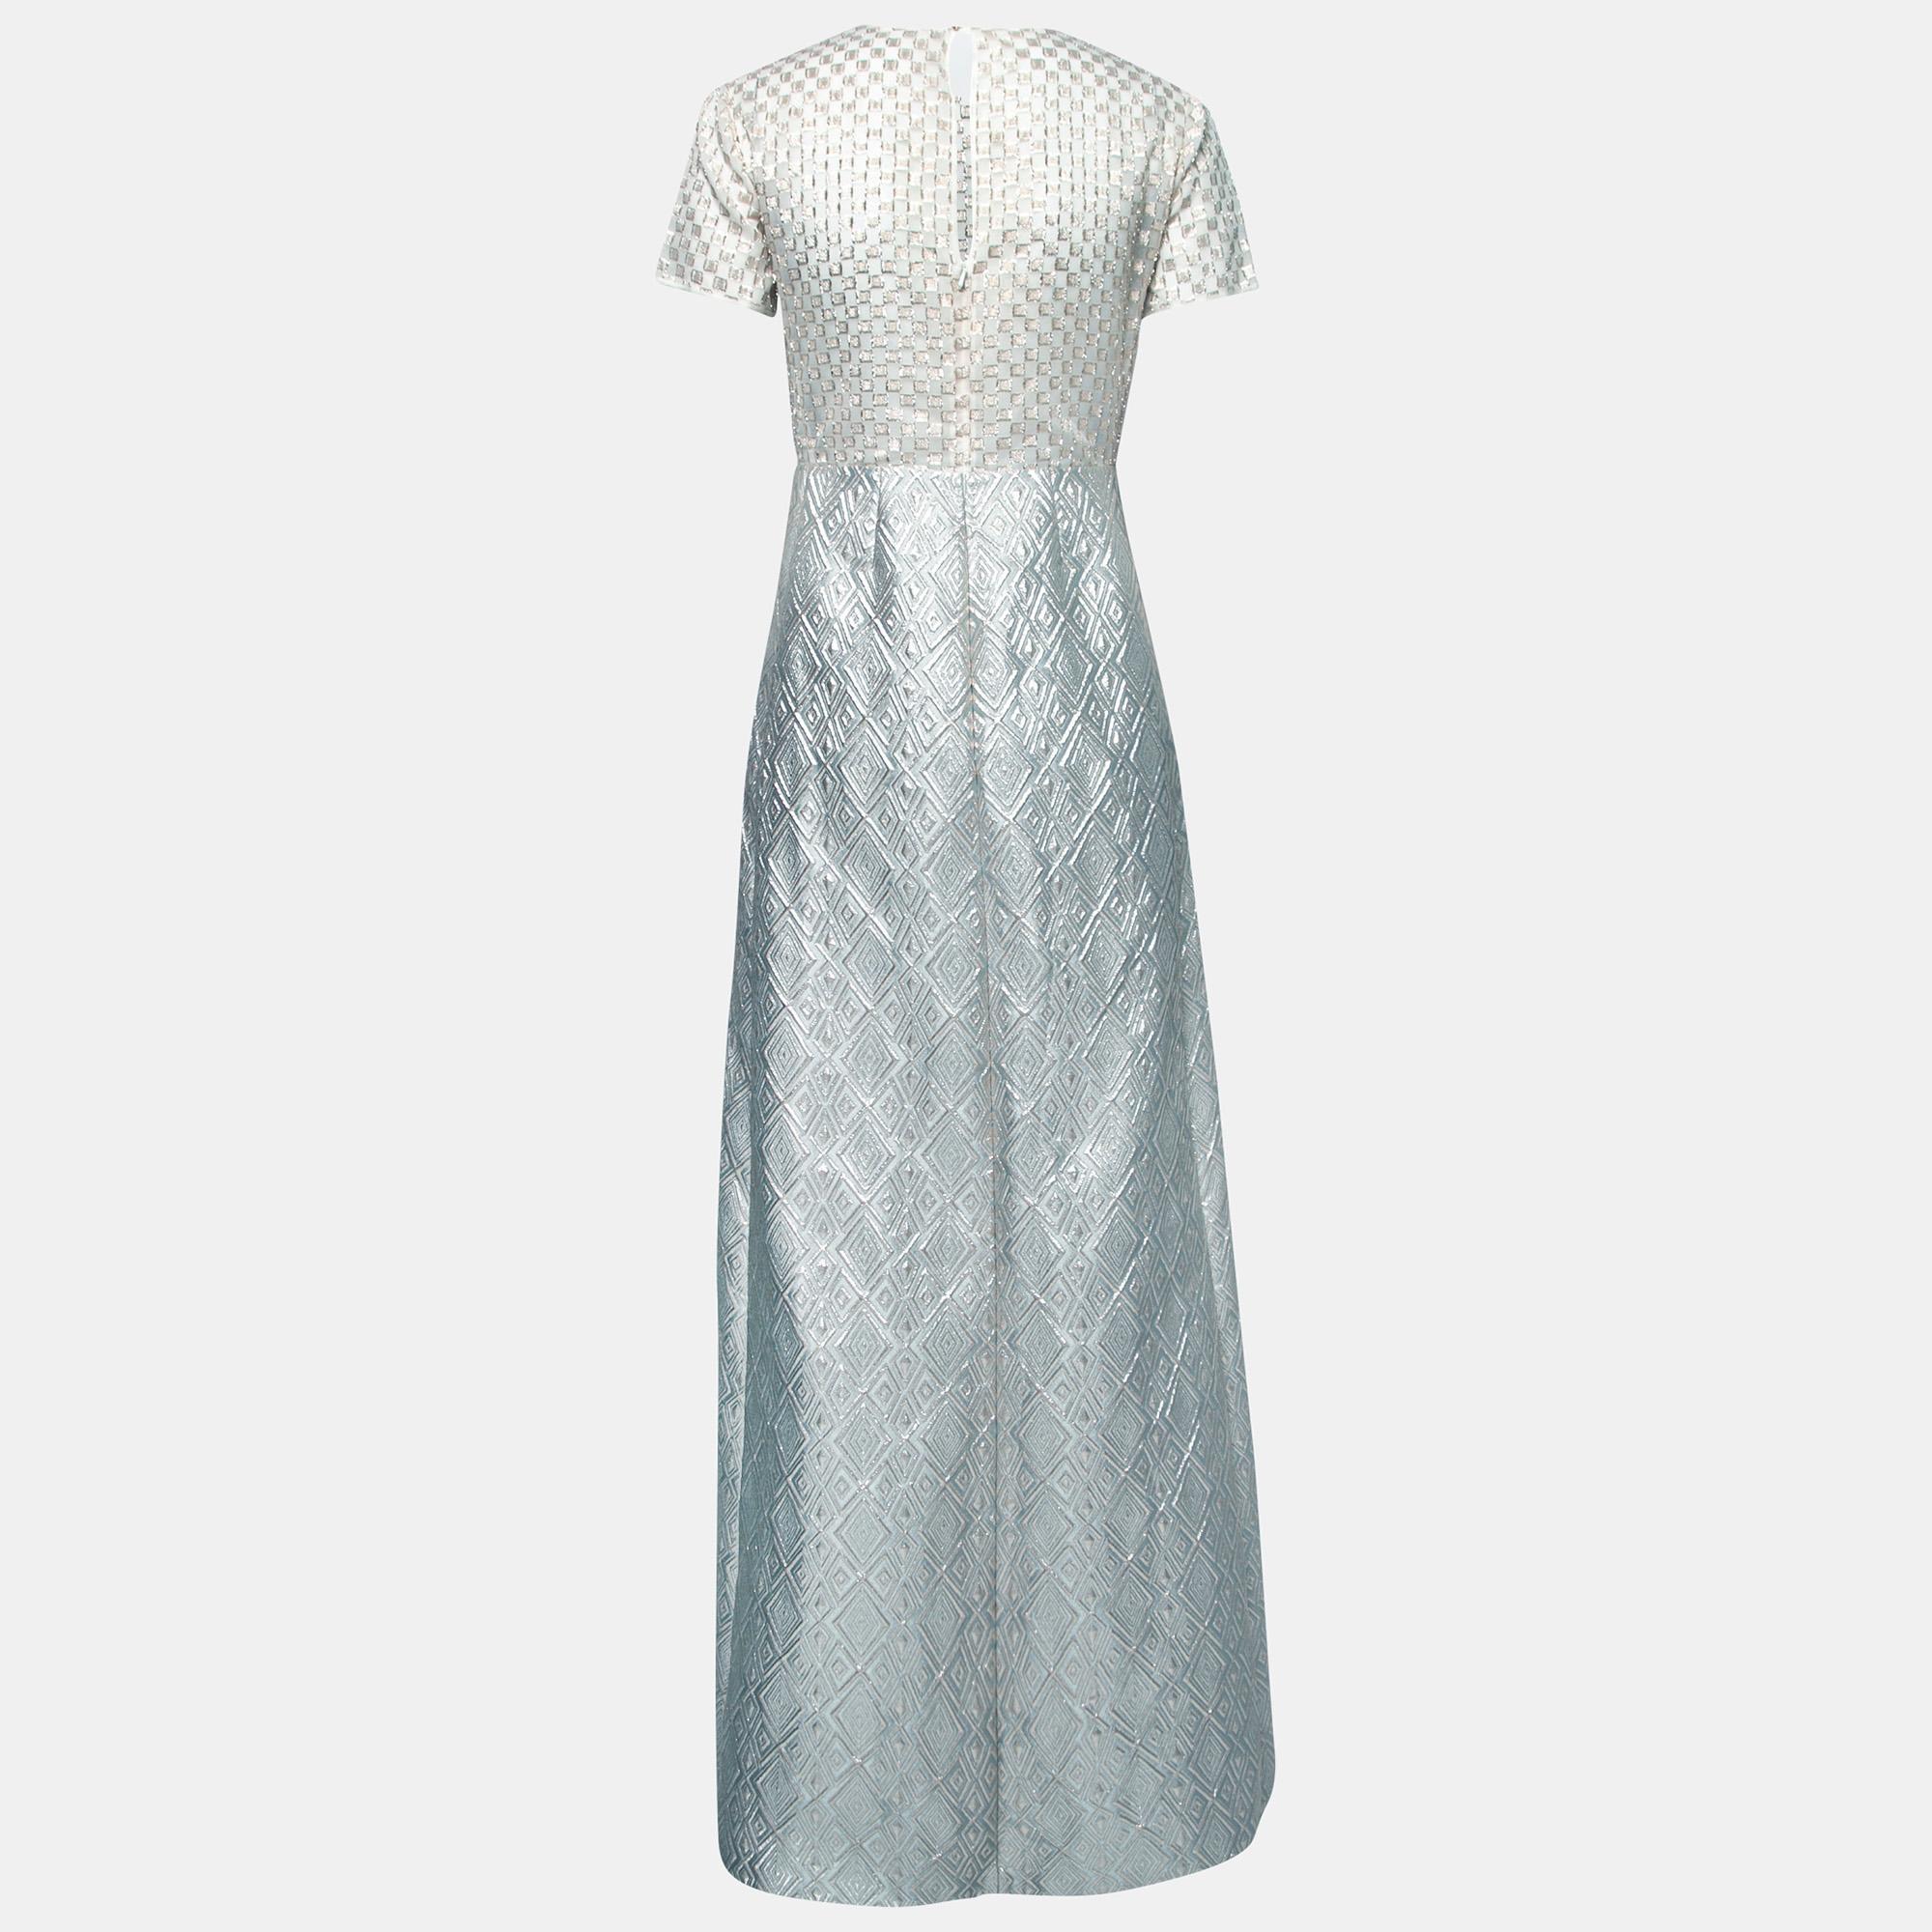 Max Mara presents to you this beautiful powder blue dress that has been exquisitely crafted from patterned fabric. The short-sleeved maxi dress features a sleek A-line, pleated silhouette that will make you feel glamorously regal. Pair it with